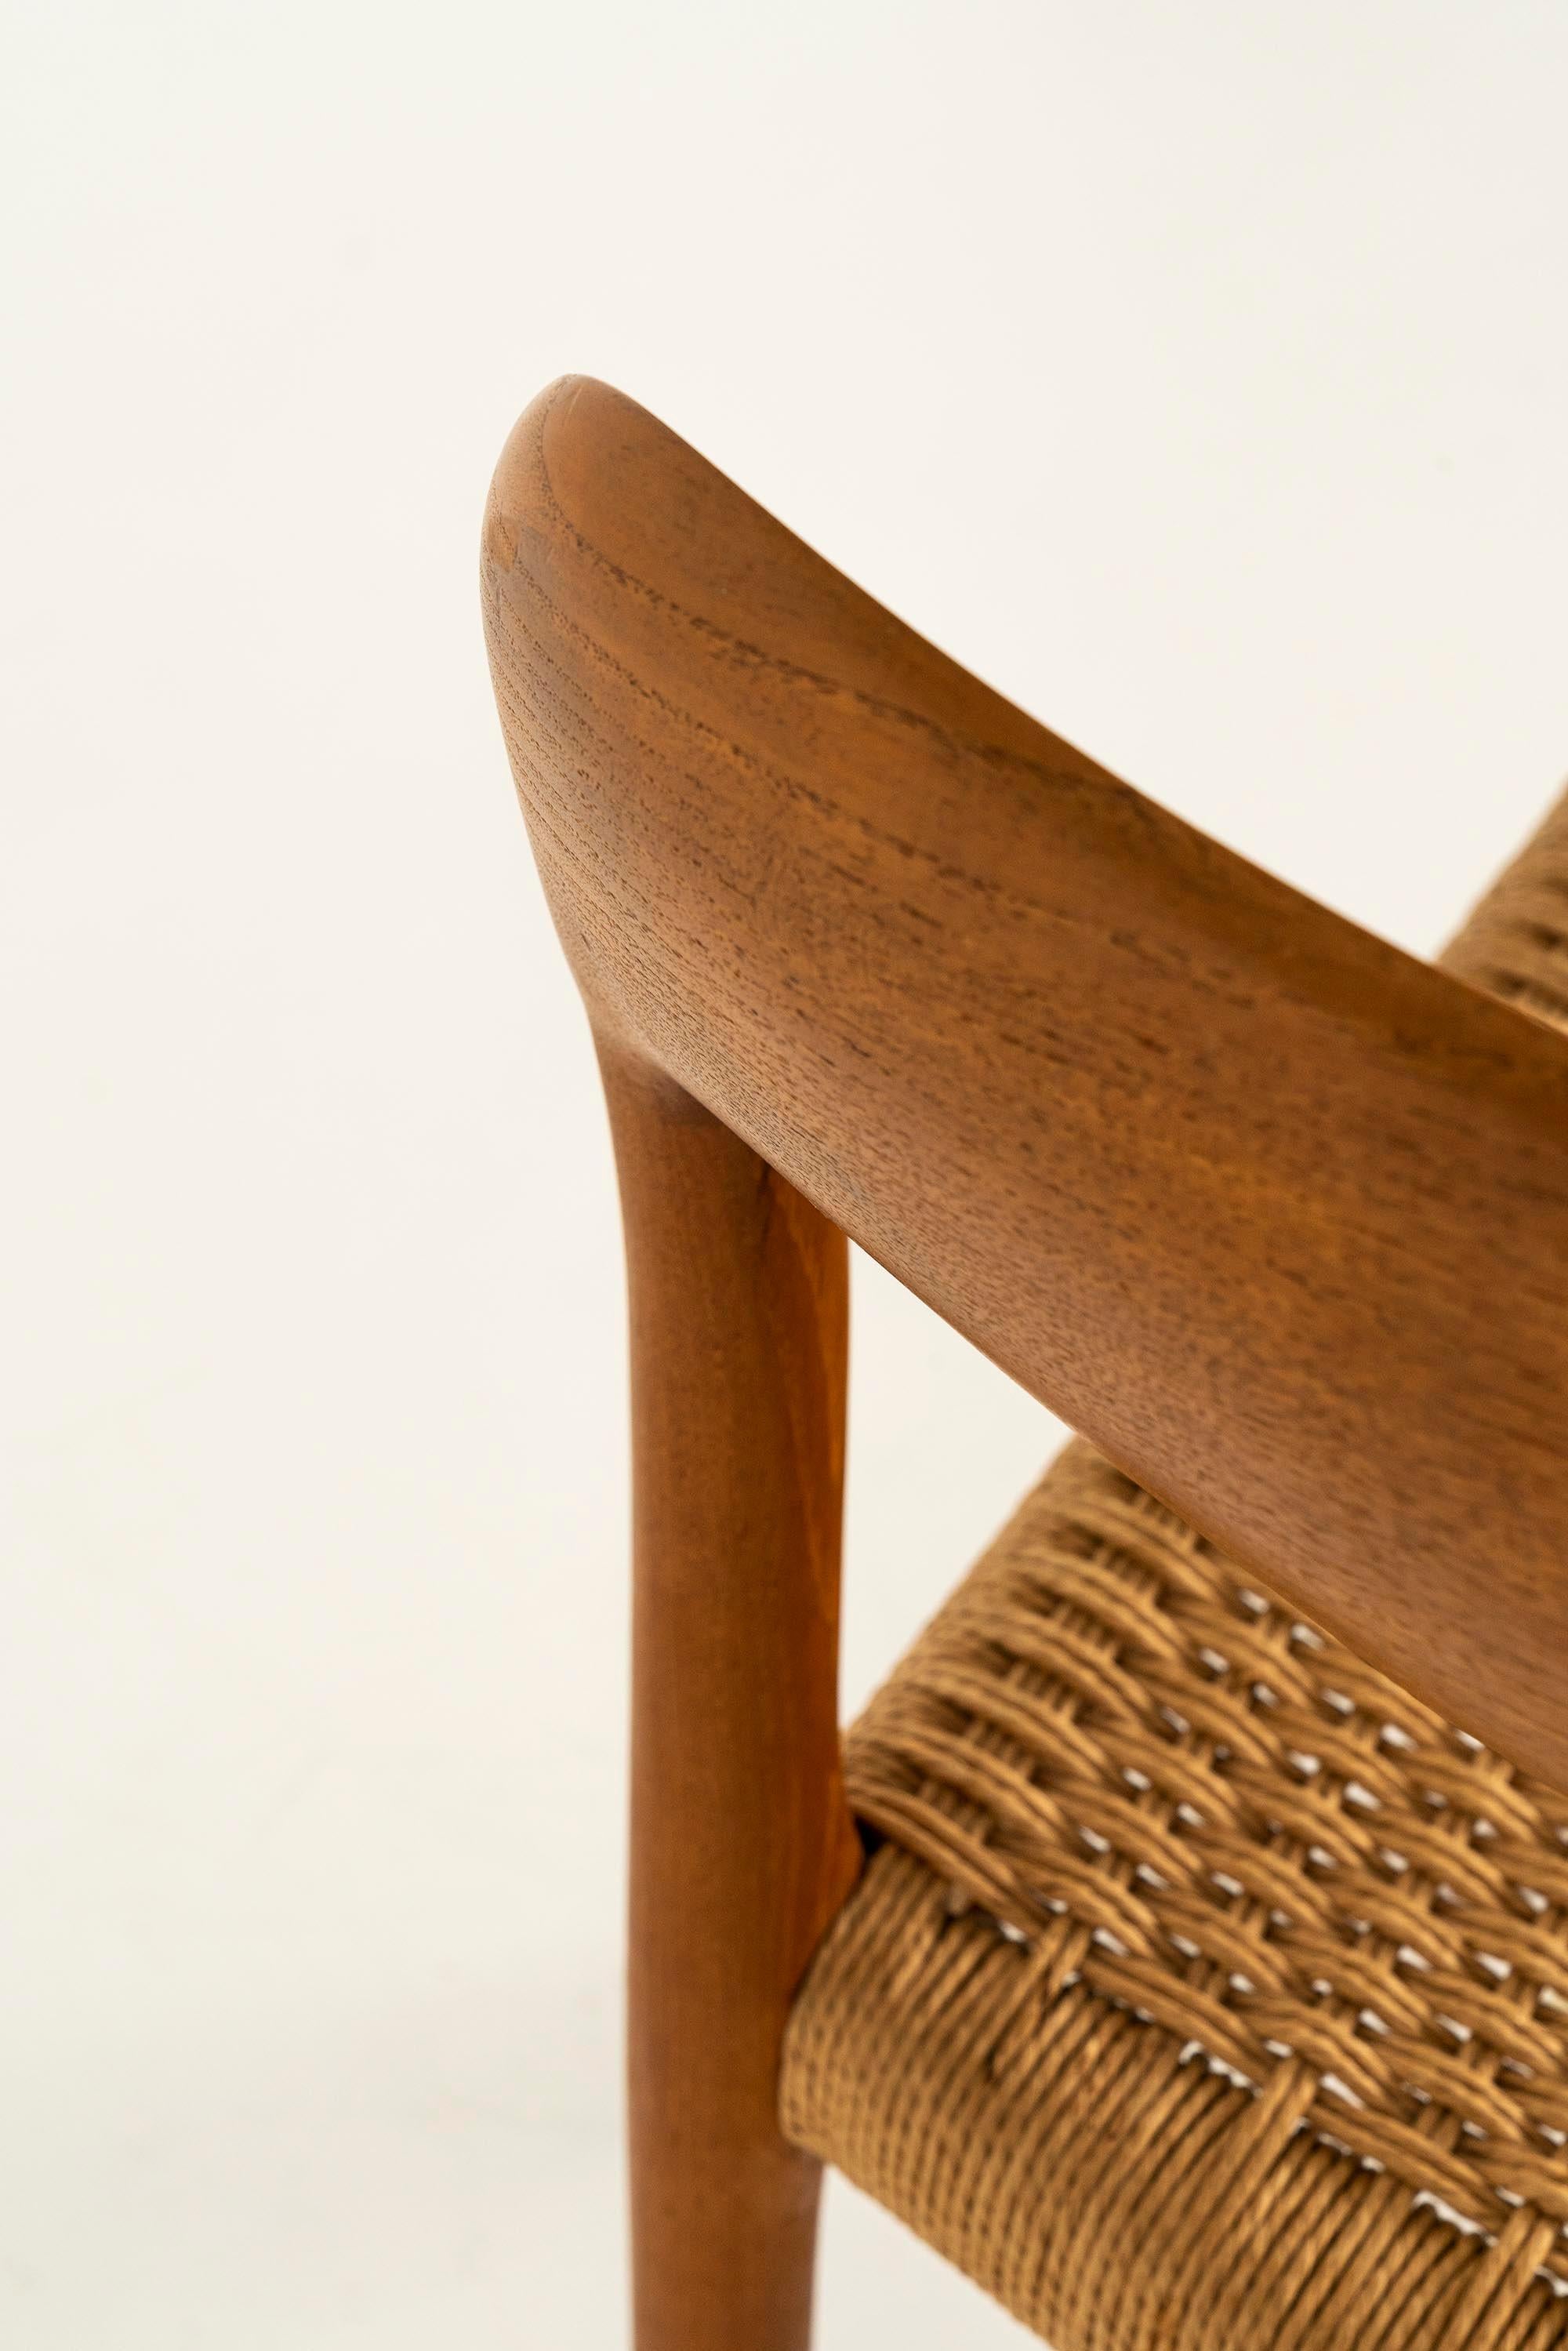 10 Niels Otto Møller 'Model 75' Chairs in Teak and Danish Paper Cord, 1960s For Sale 6